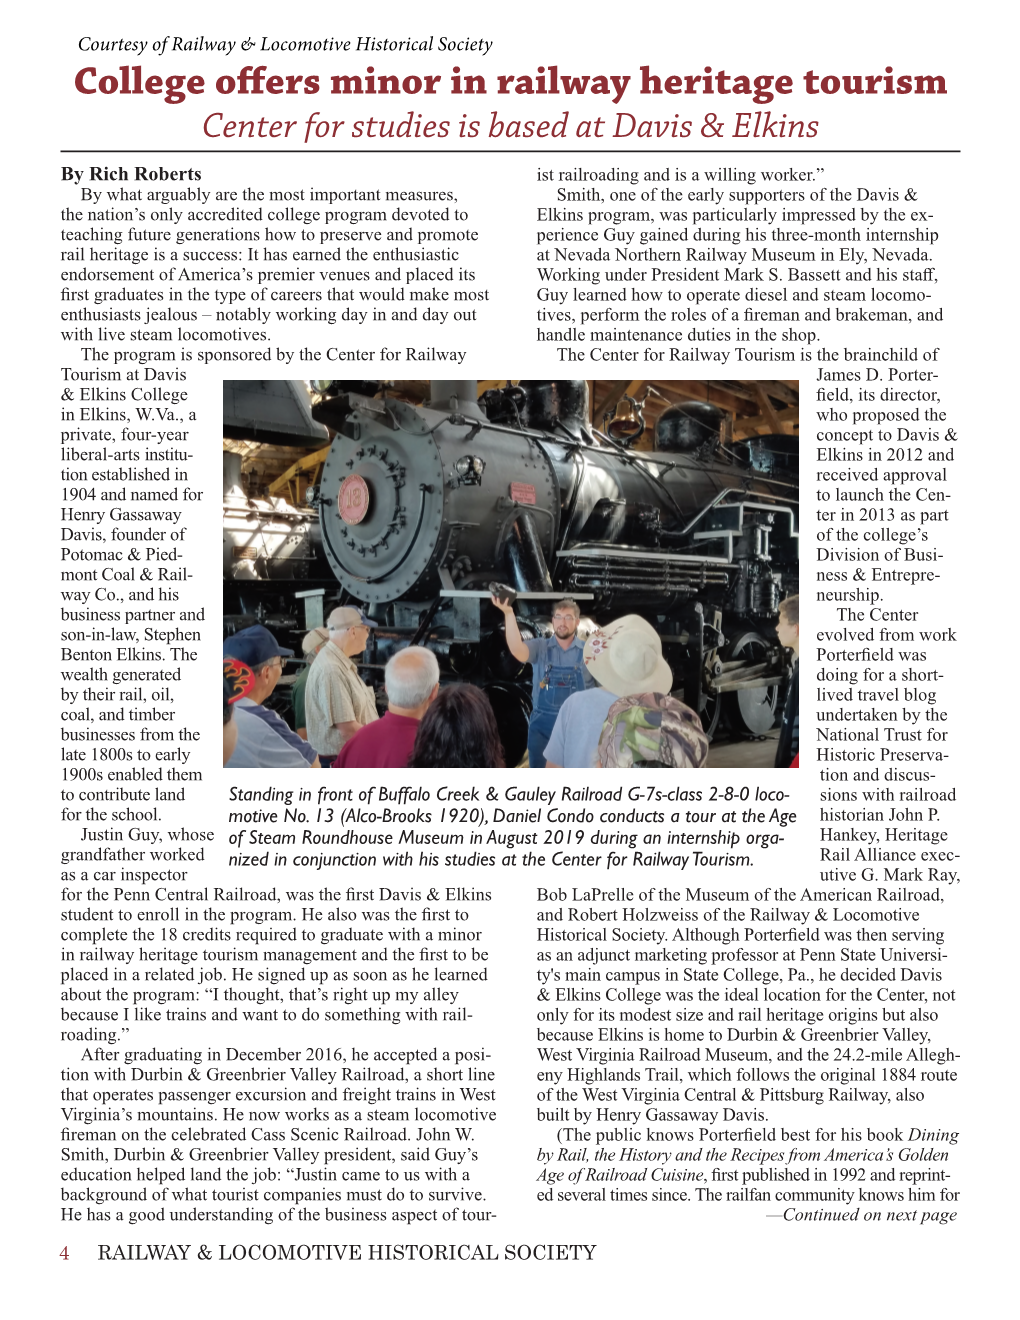 College Offers Minor in Railway Heritage Tourism Center for Studies Is Based at Davis & Elkins